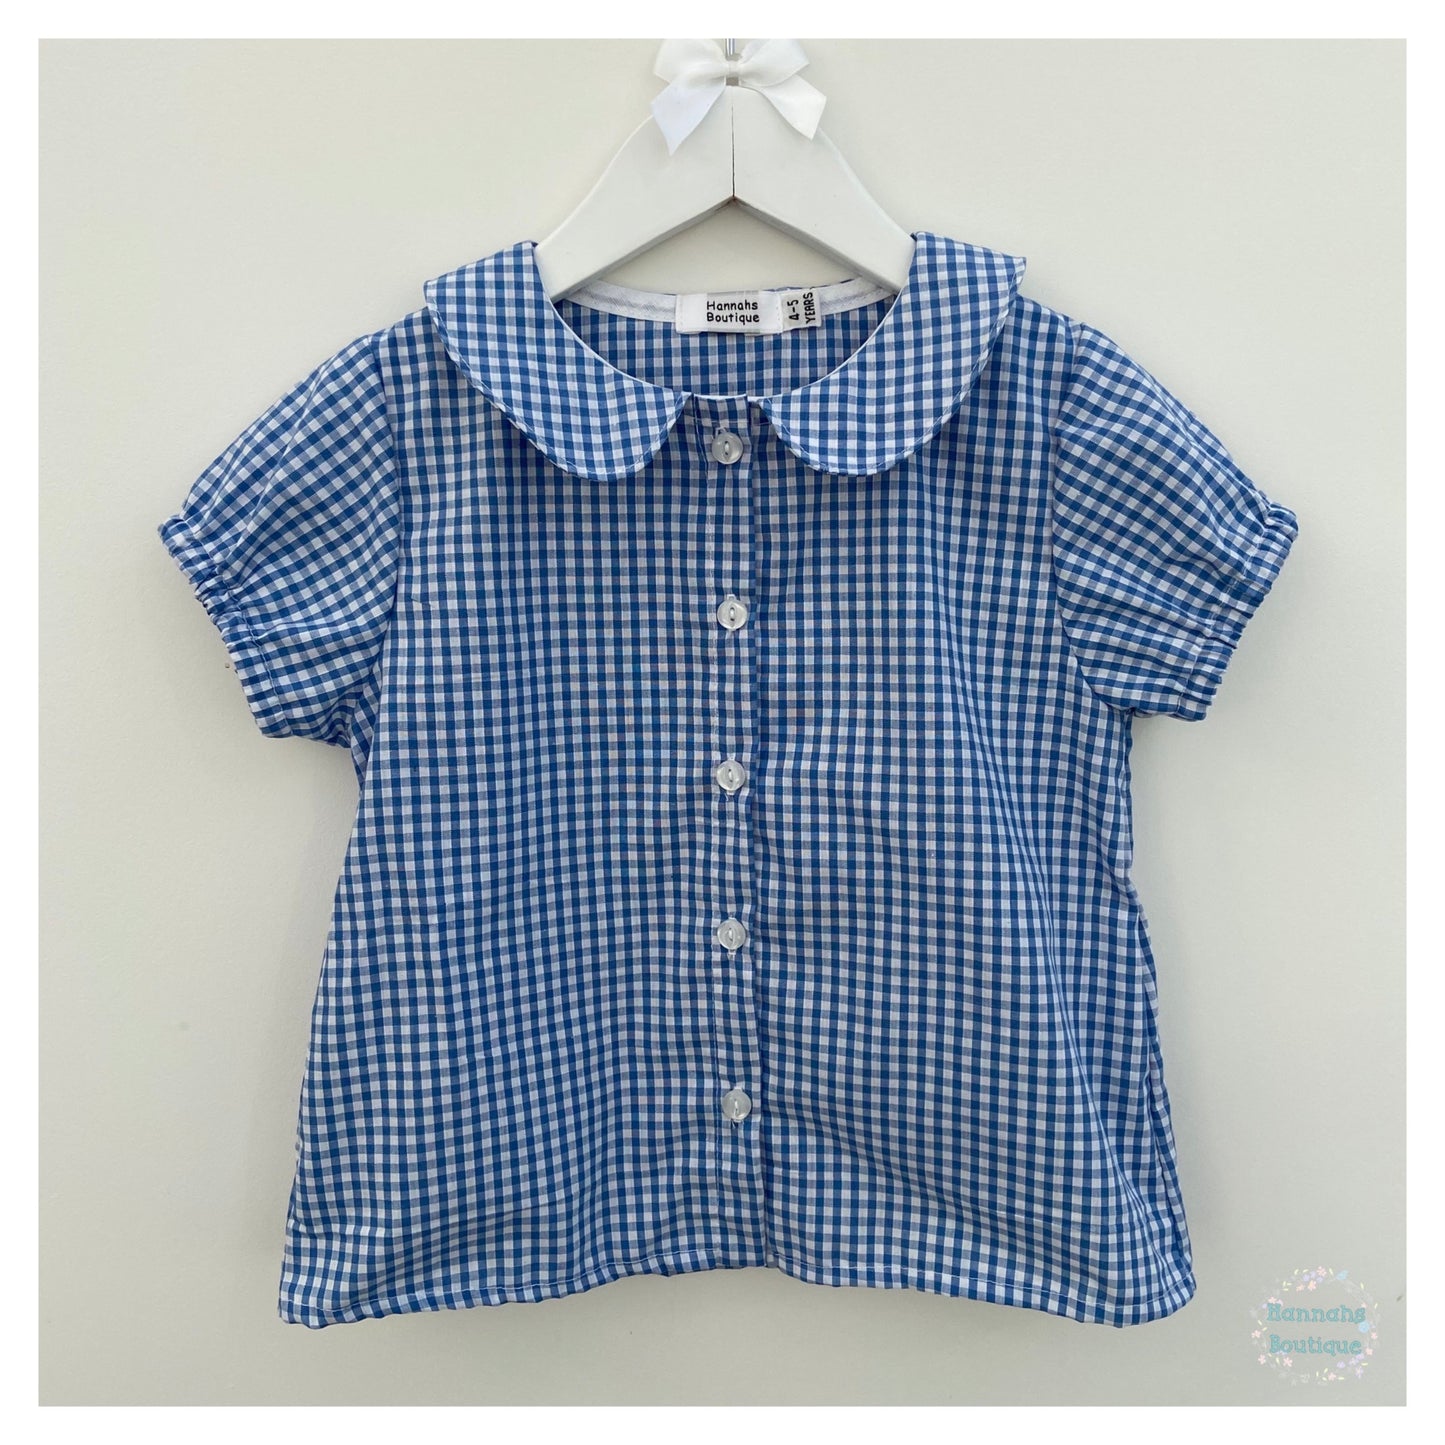 Peter Pan Collar Gingham School Blouse (colour options) MADE TO ORDER